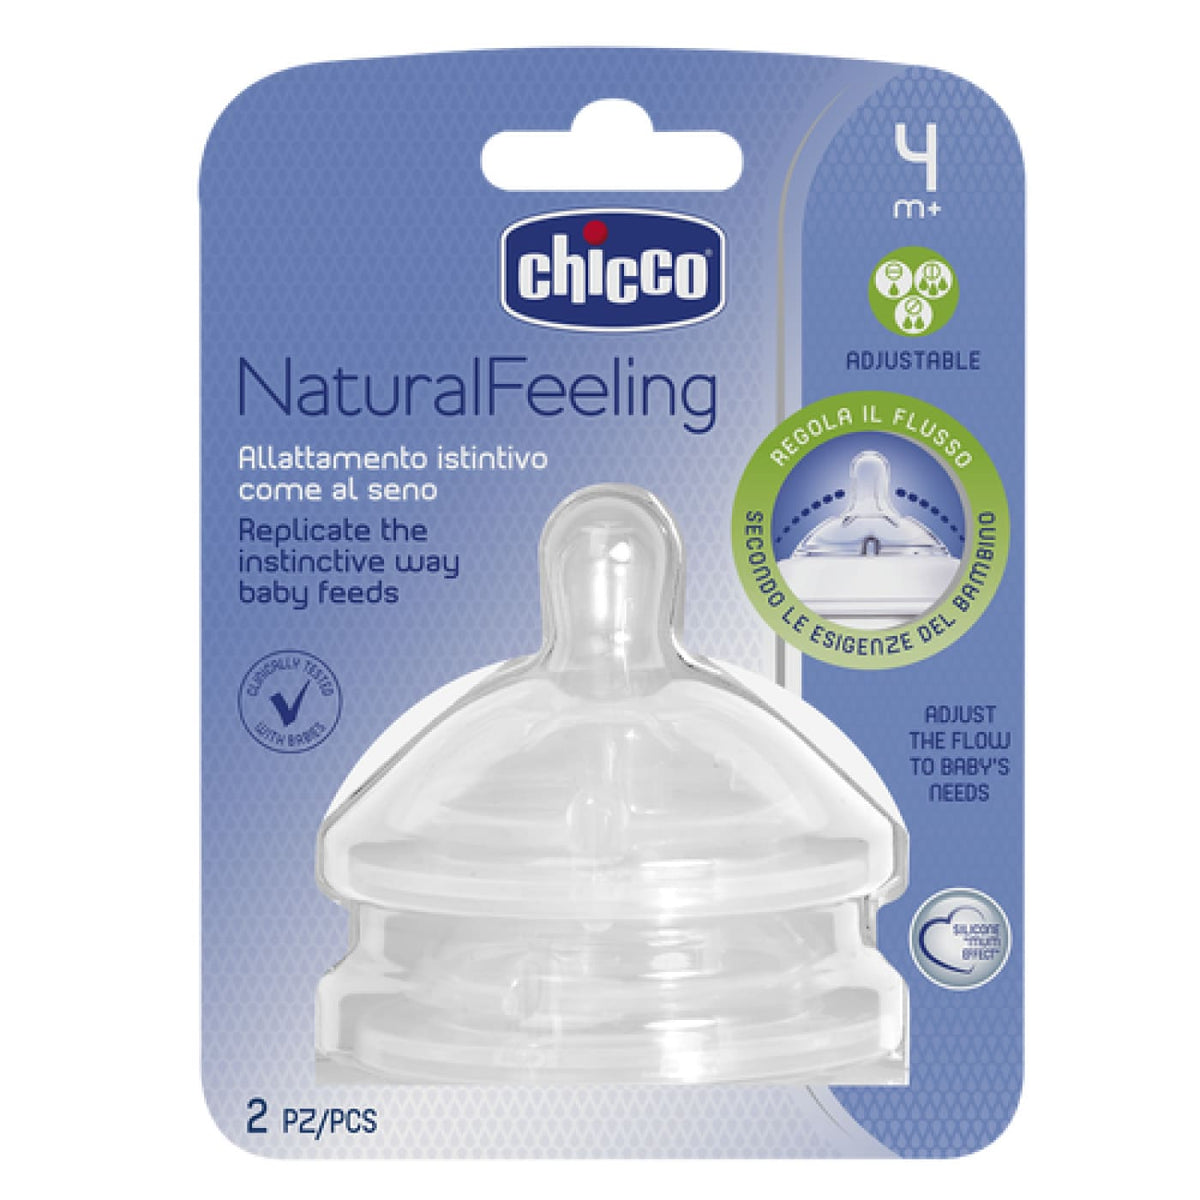 Chicco Natural Feeling Silicone Teat 4M+ 2pk - Adjustable Flow - NURSING &amp; FEEDING - BOTTLE ACCESSORIES